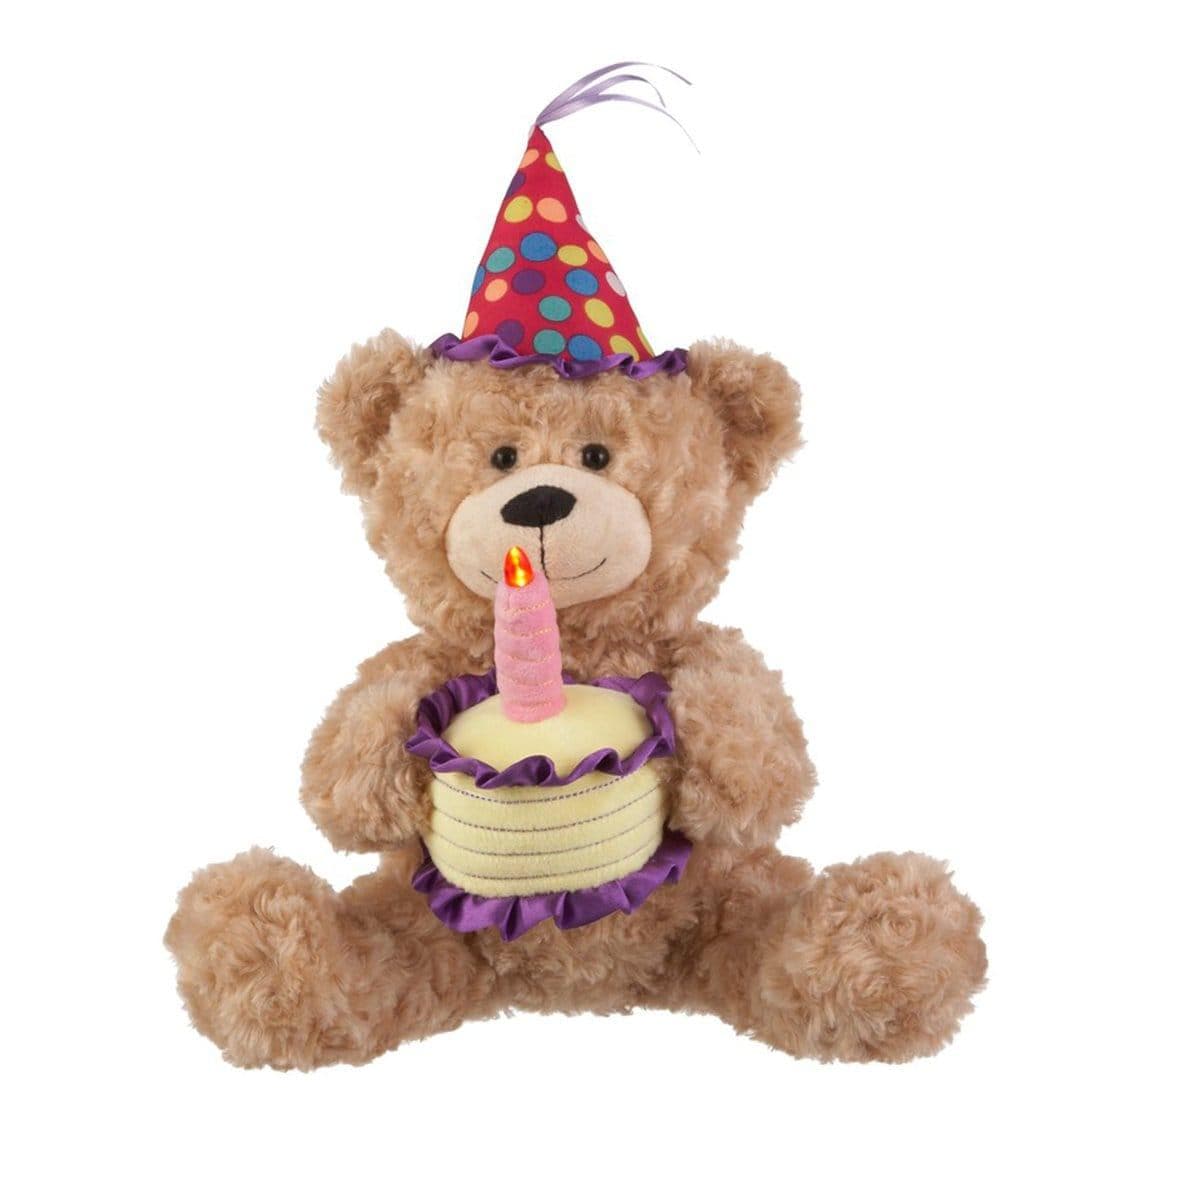 Buy Plushes Teddy Bear Plushes W/hat & Cake sold at Party Expert